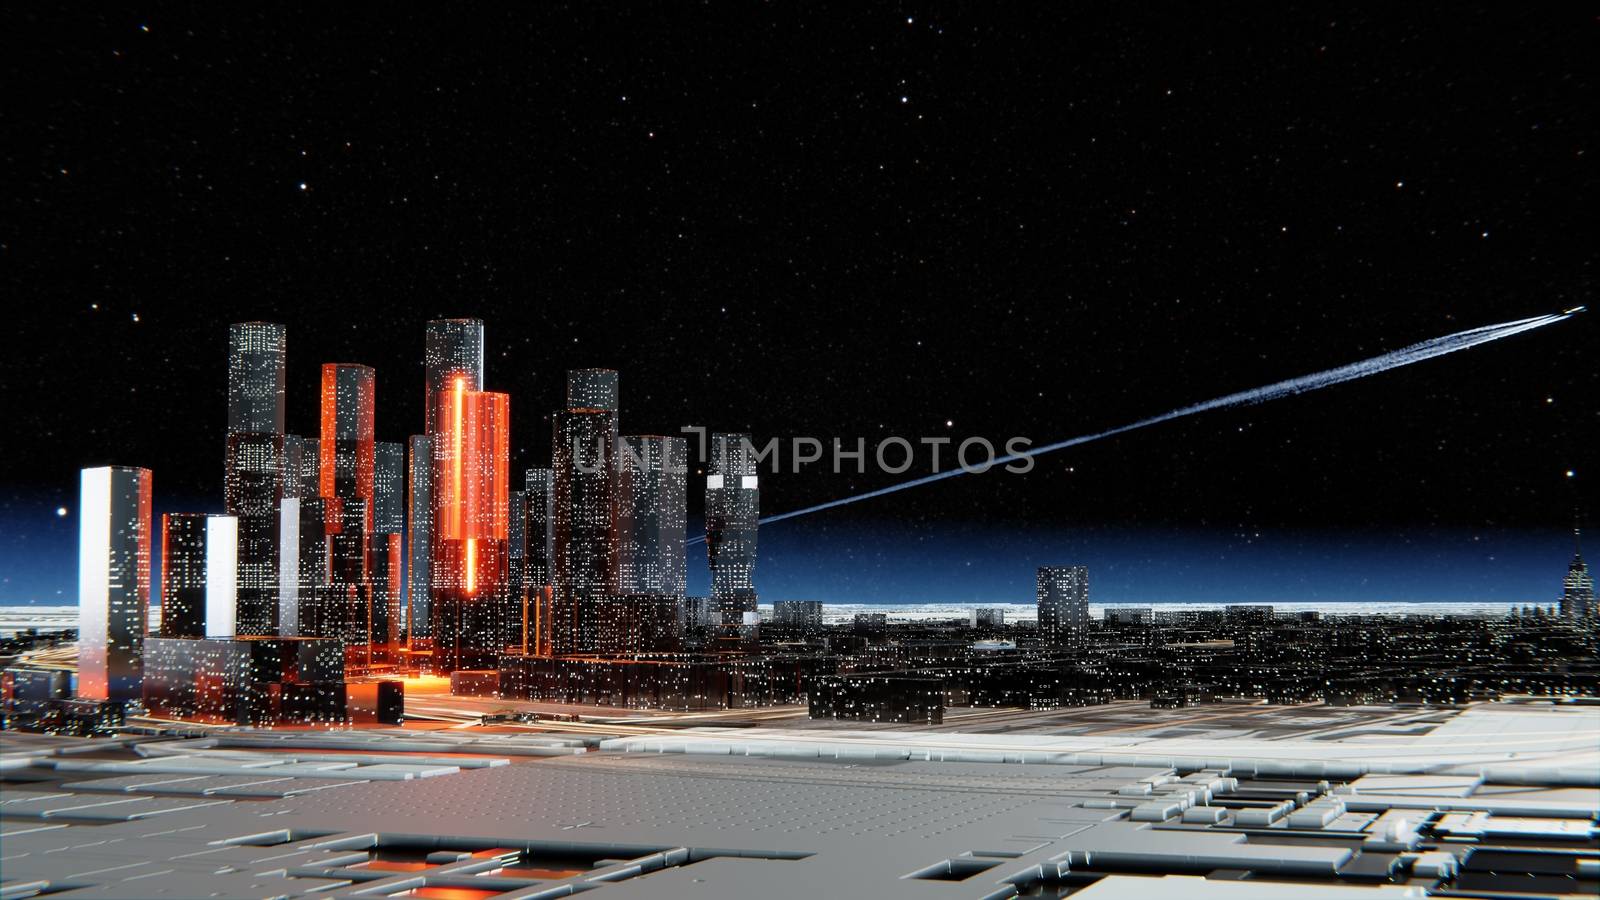 Futuristic glass city with luminous windows. Luminous roads and bright flashes between houses. Starry atmospheric sky with a flying airplane on the background. 3D illustration